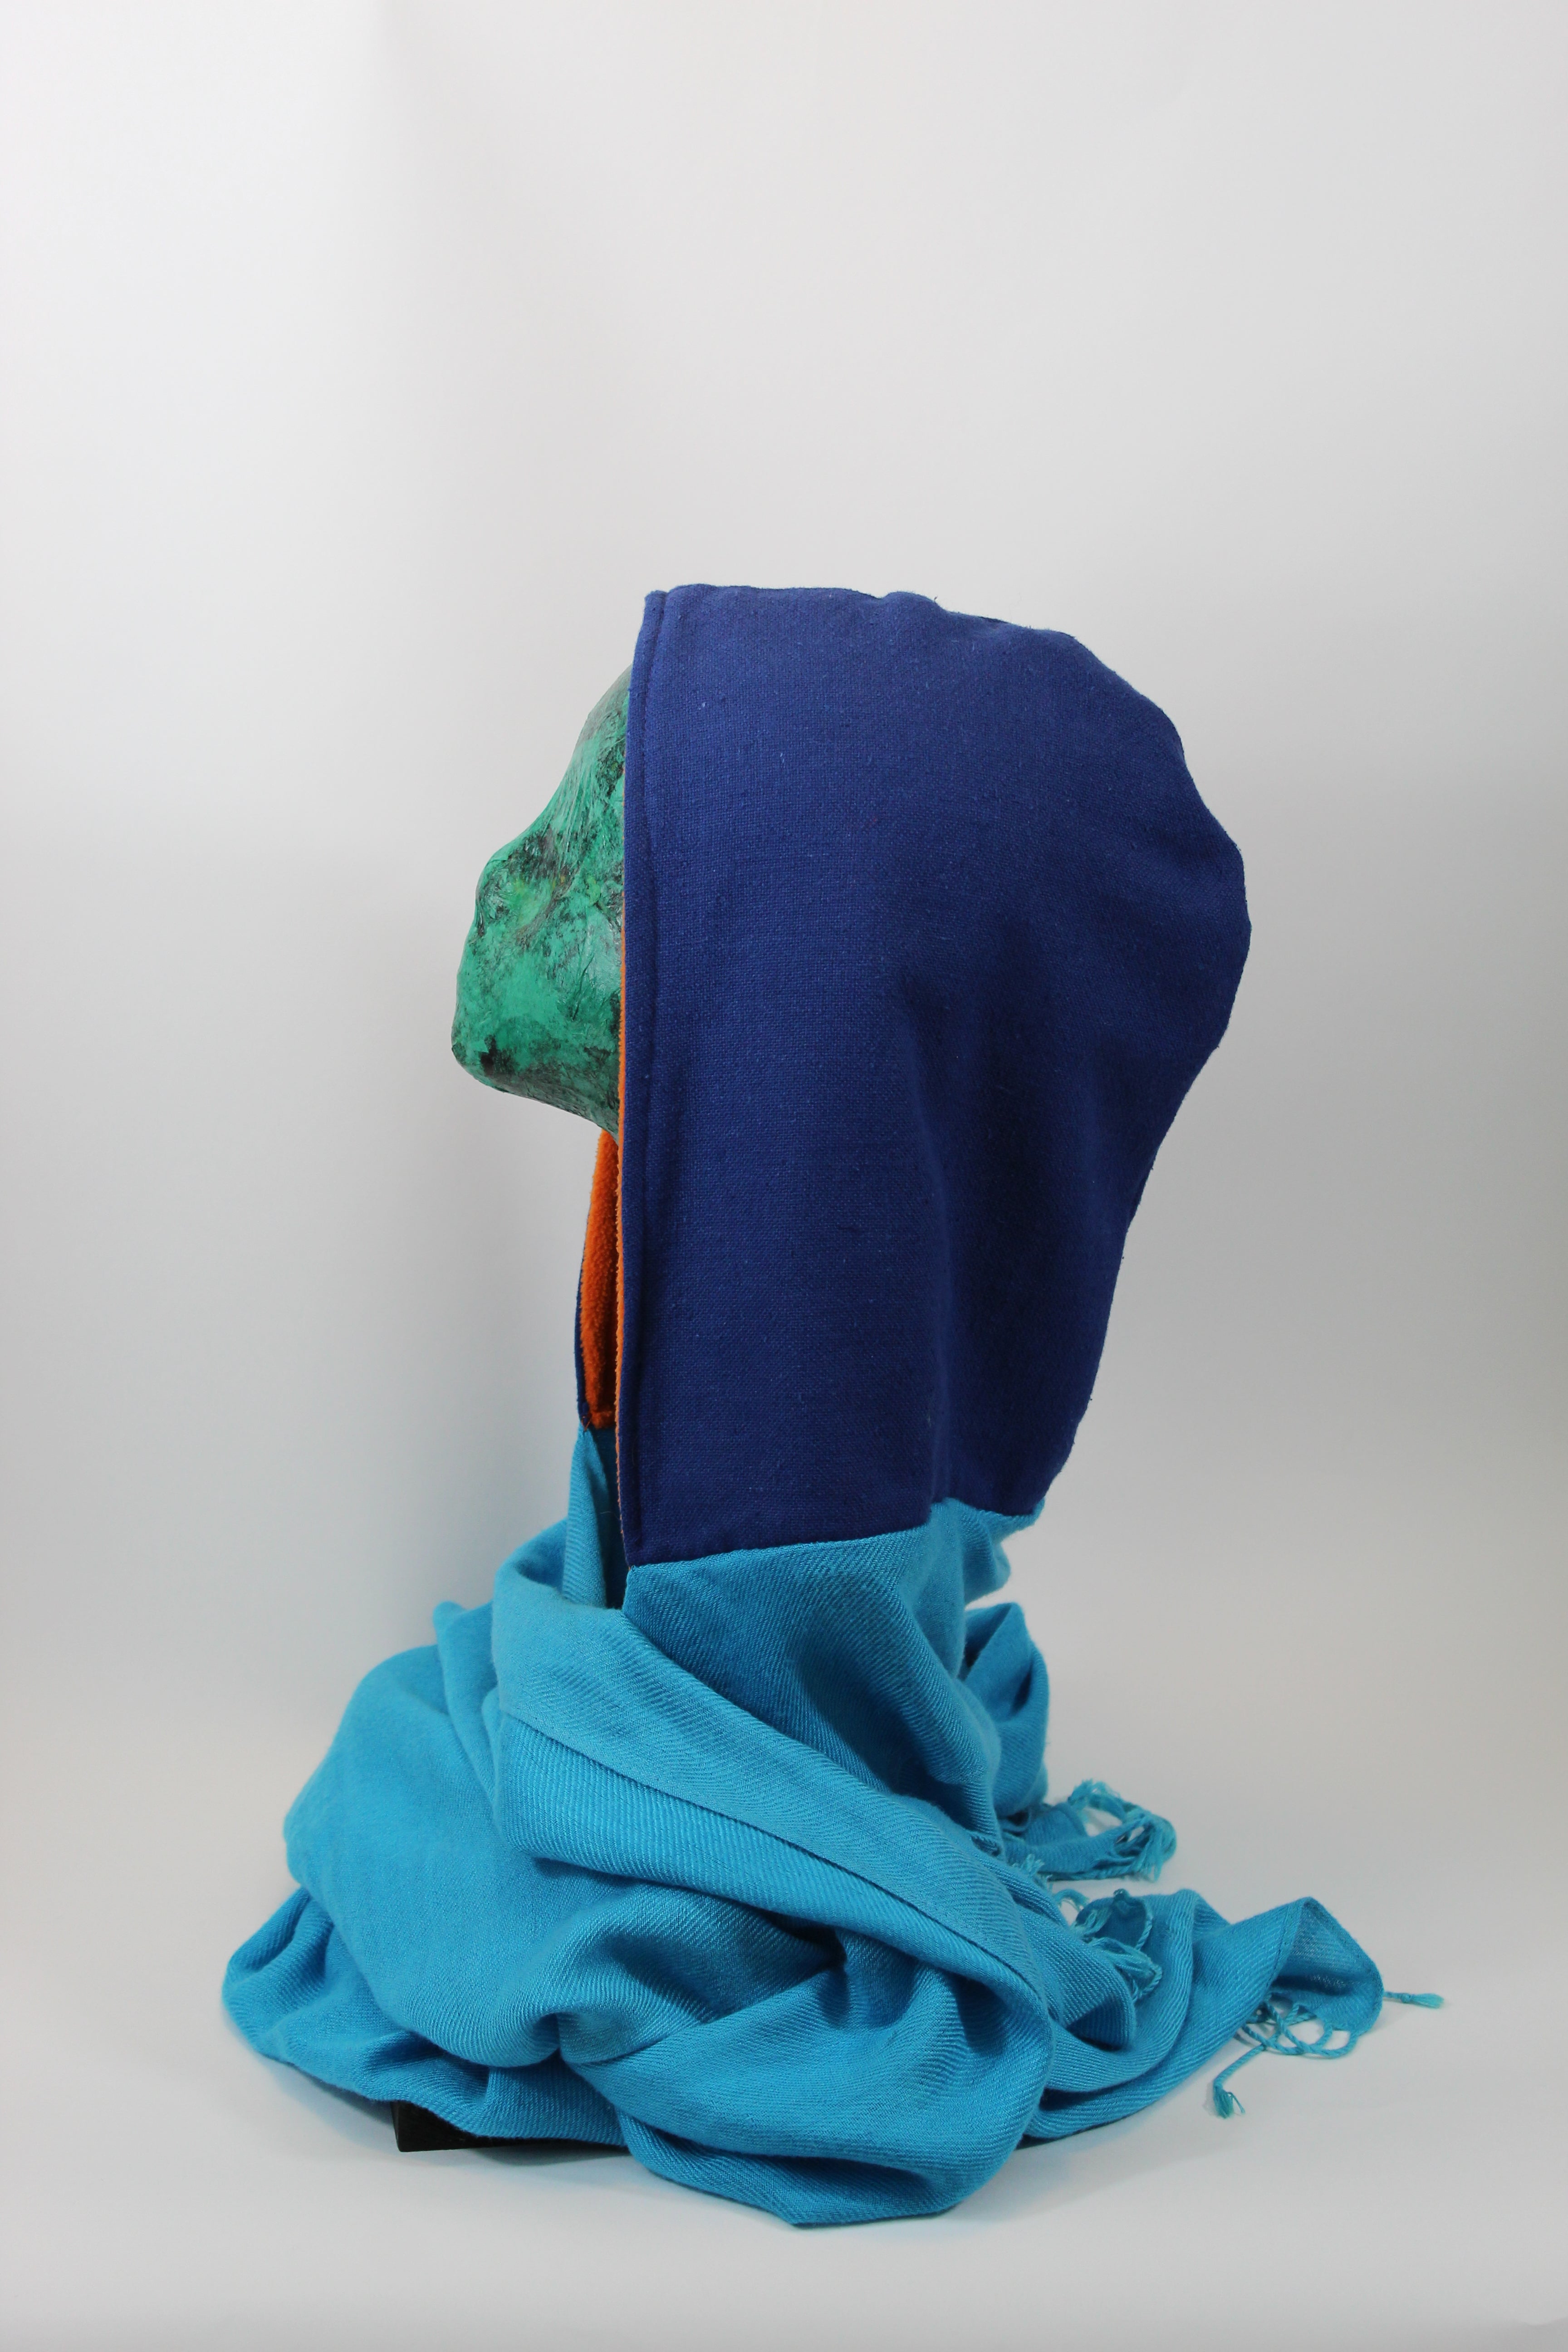 Royal Blue Hoodie Scarf With Orange Lining and Light Blue Standard Scarf